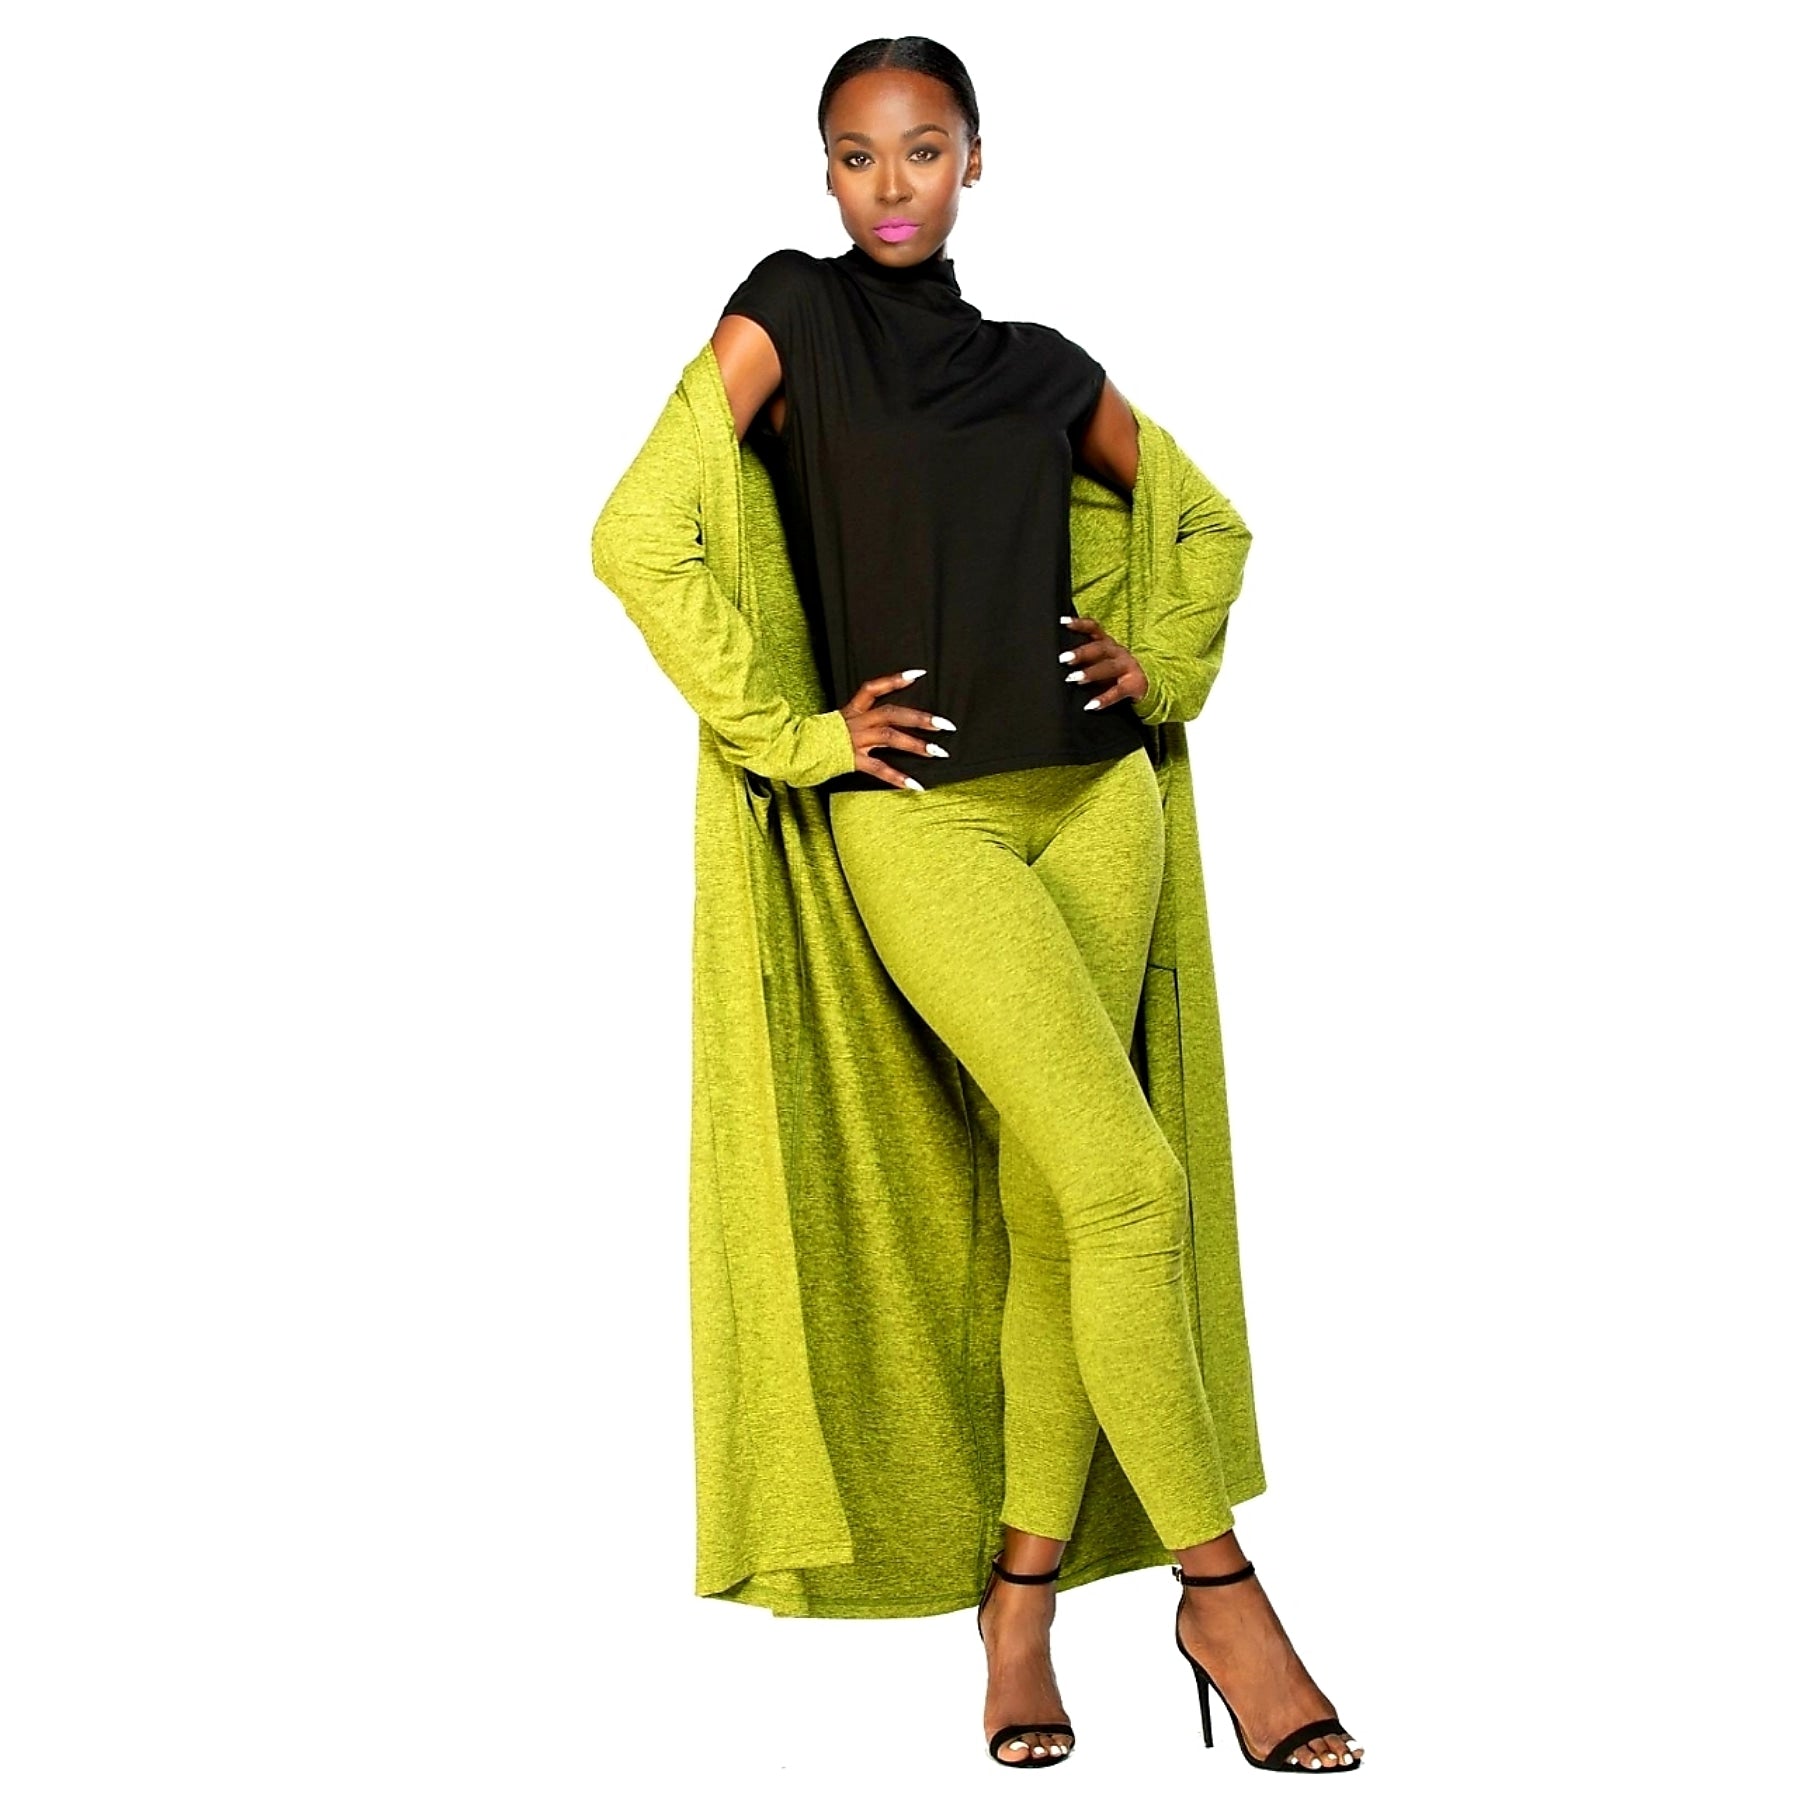 Kimberly Love Duster - Freckled Chartreuse